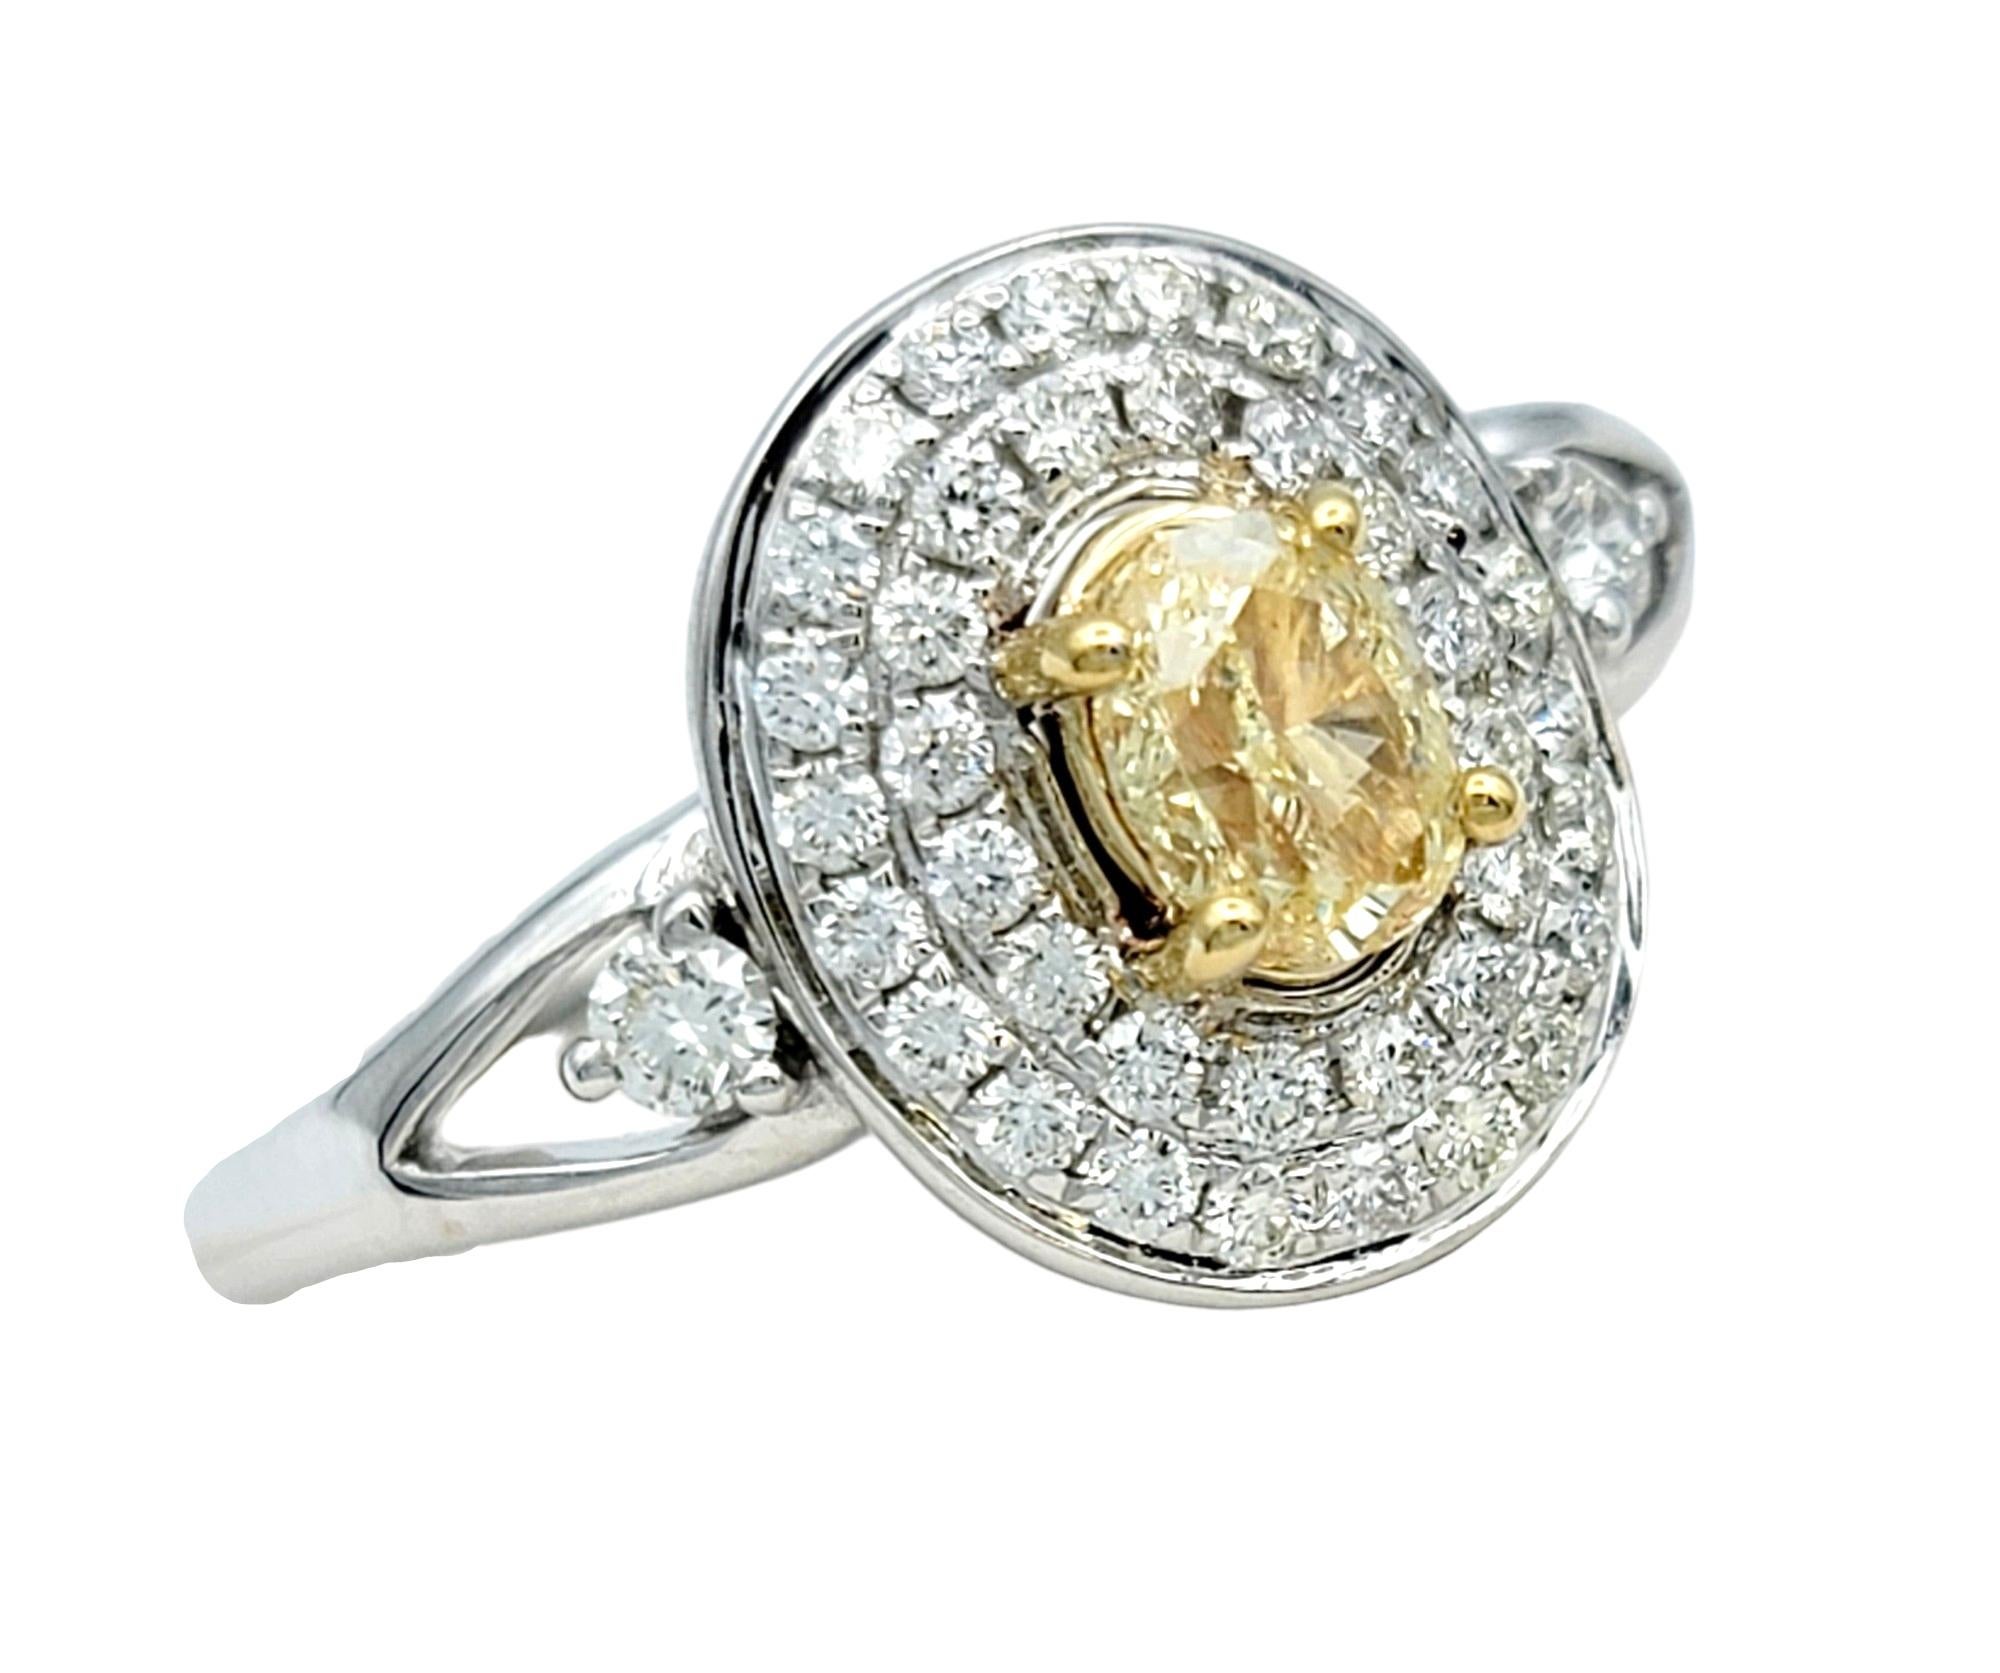 Ring Size: 7.25

Embrace unparalleled elegance with this enchanting 14 karat white gold ring, adorned with a captivating oval-cut fancy yellow diamond at its heart. Encircling the radiant centerpiece is a double row clustered pave diamond halo,